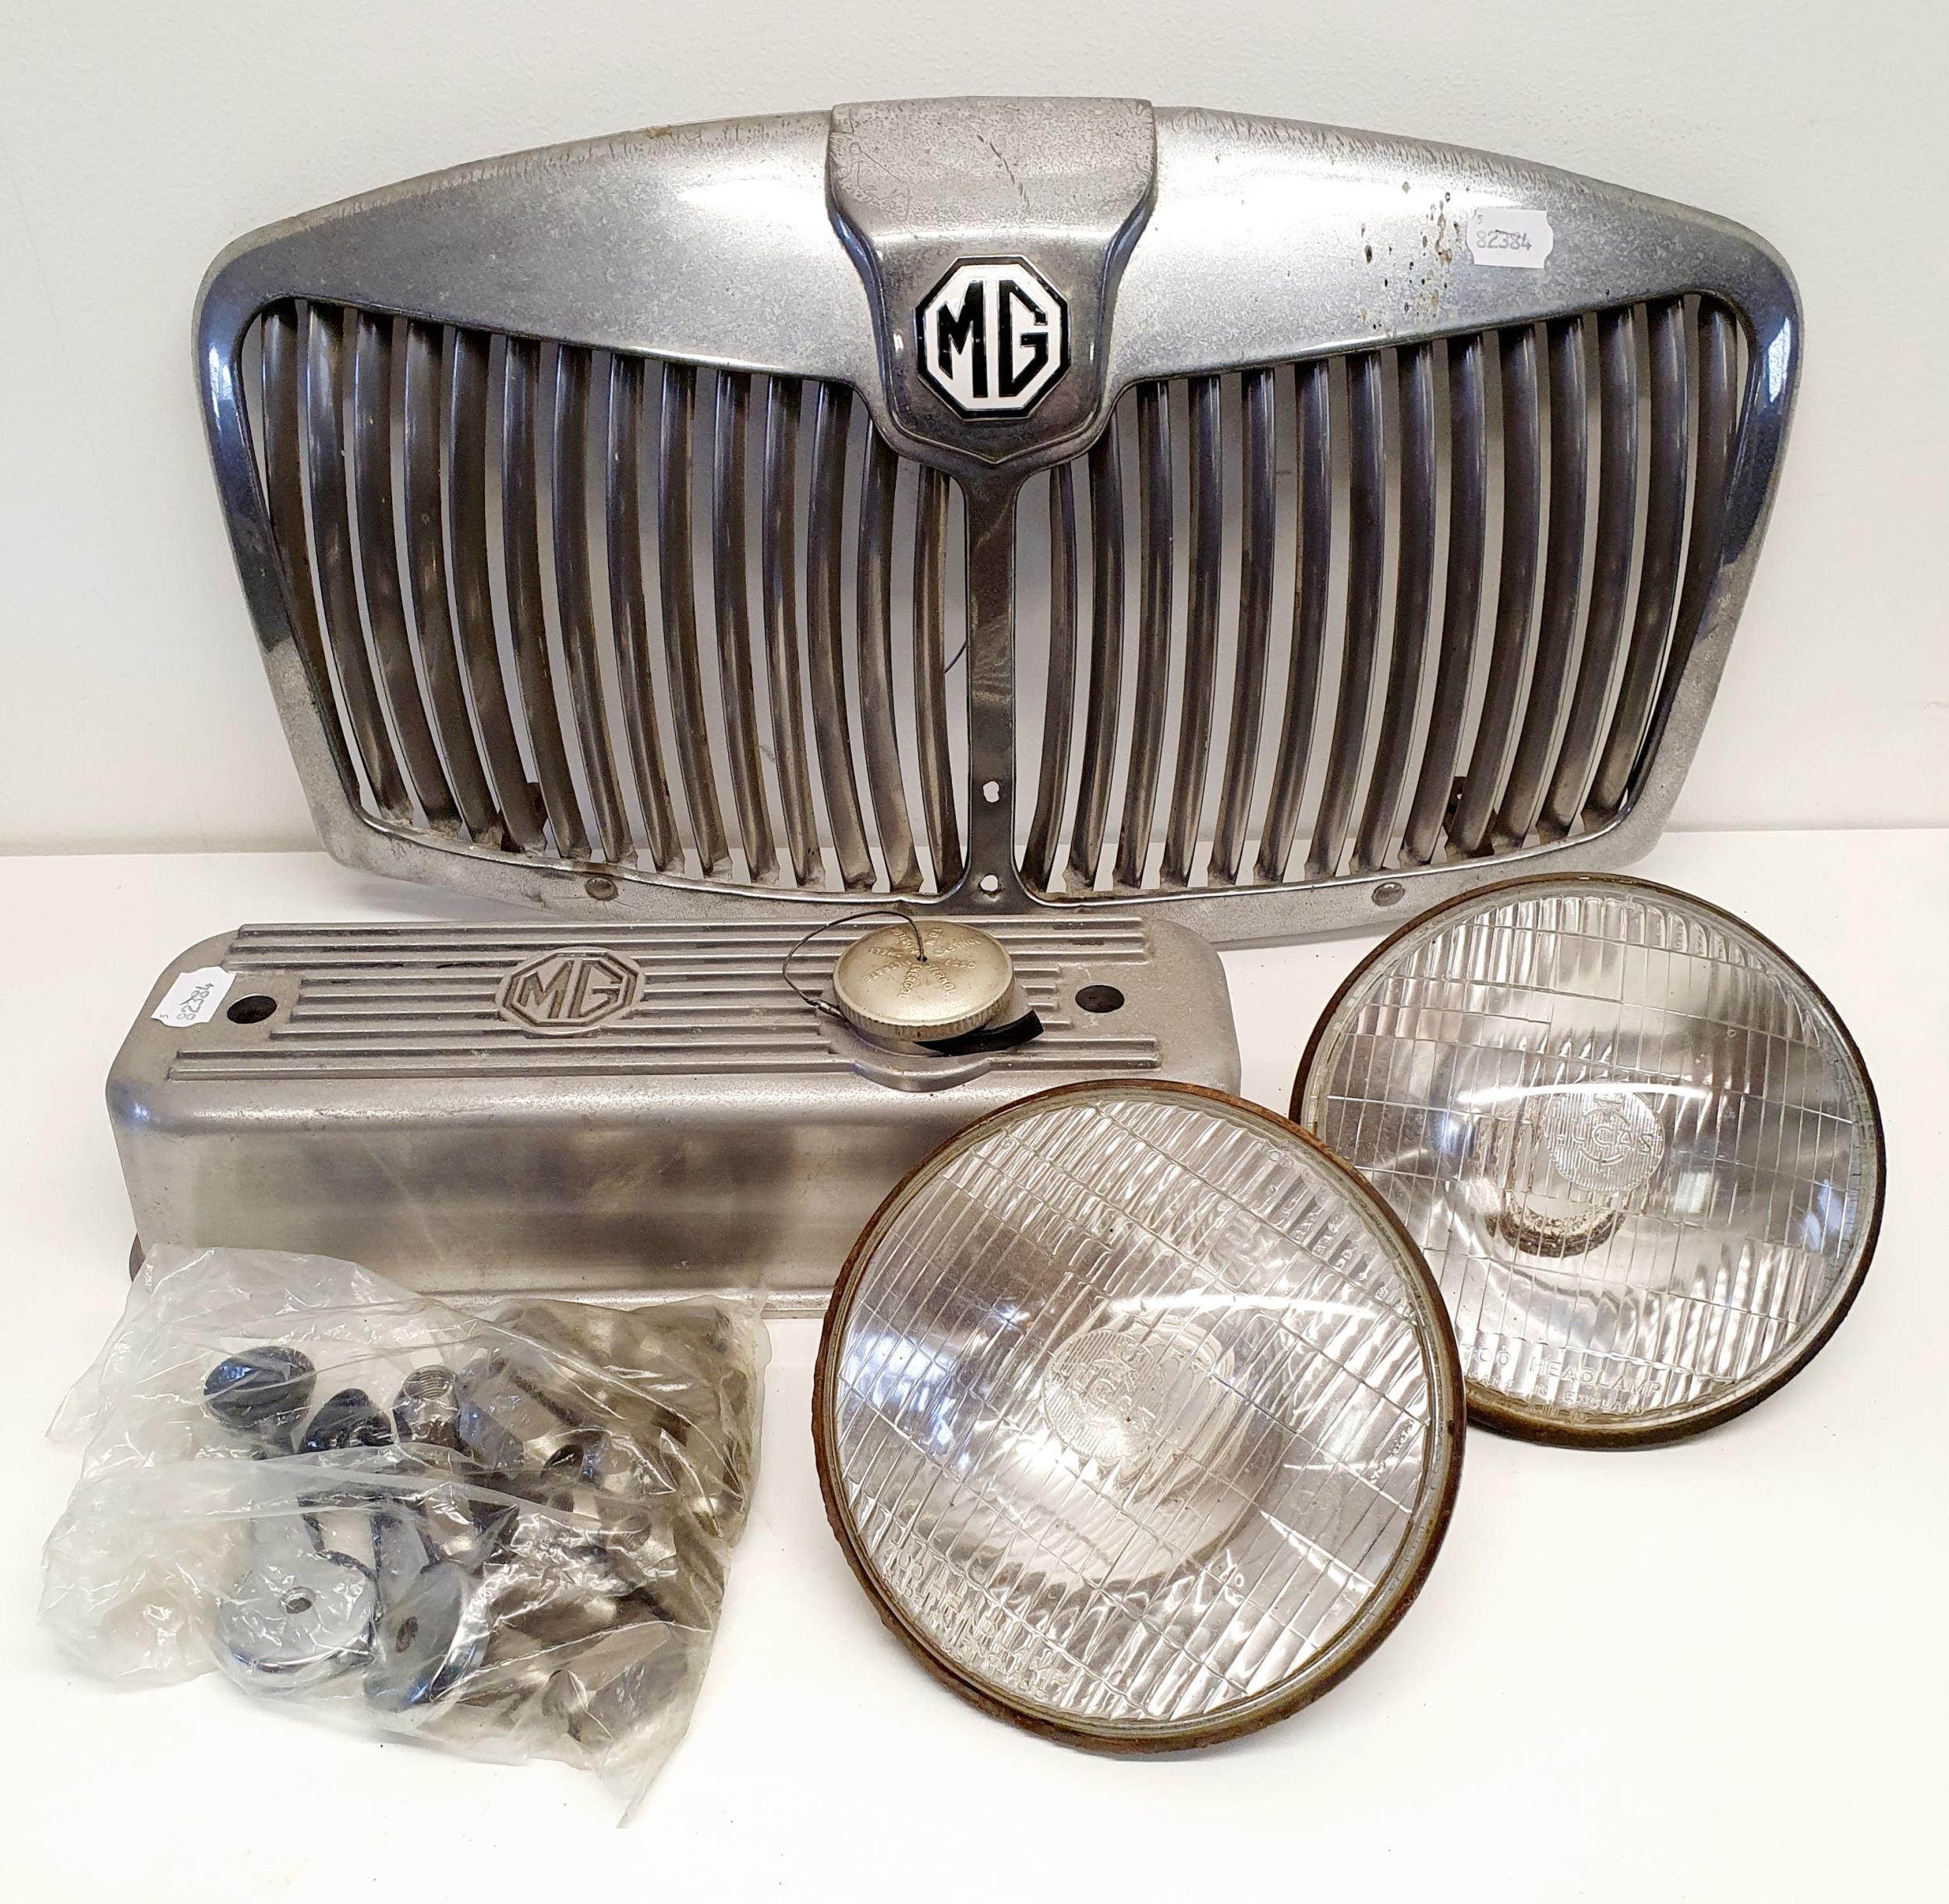 An MG A chrome radiator grill, a polished alloy rocker box cover, suitable for an MG B, with a